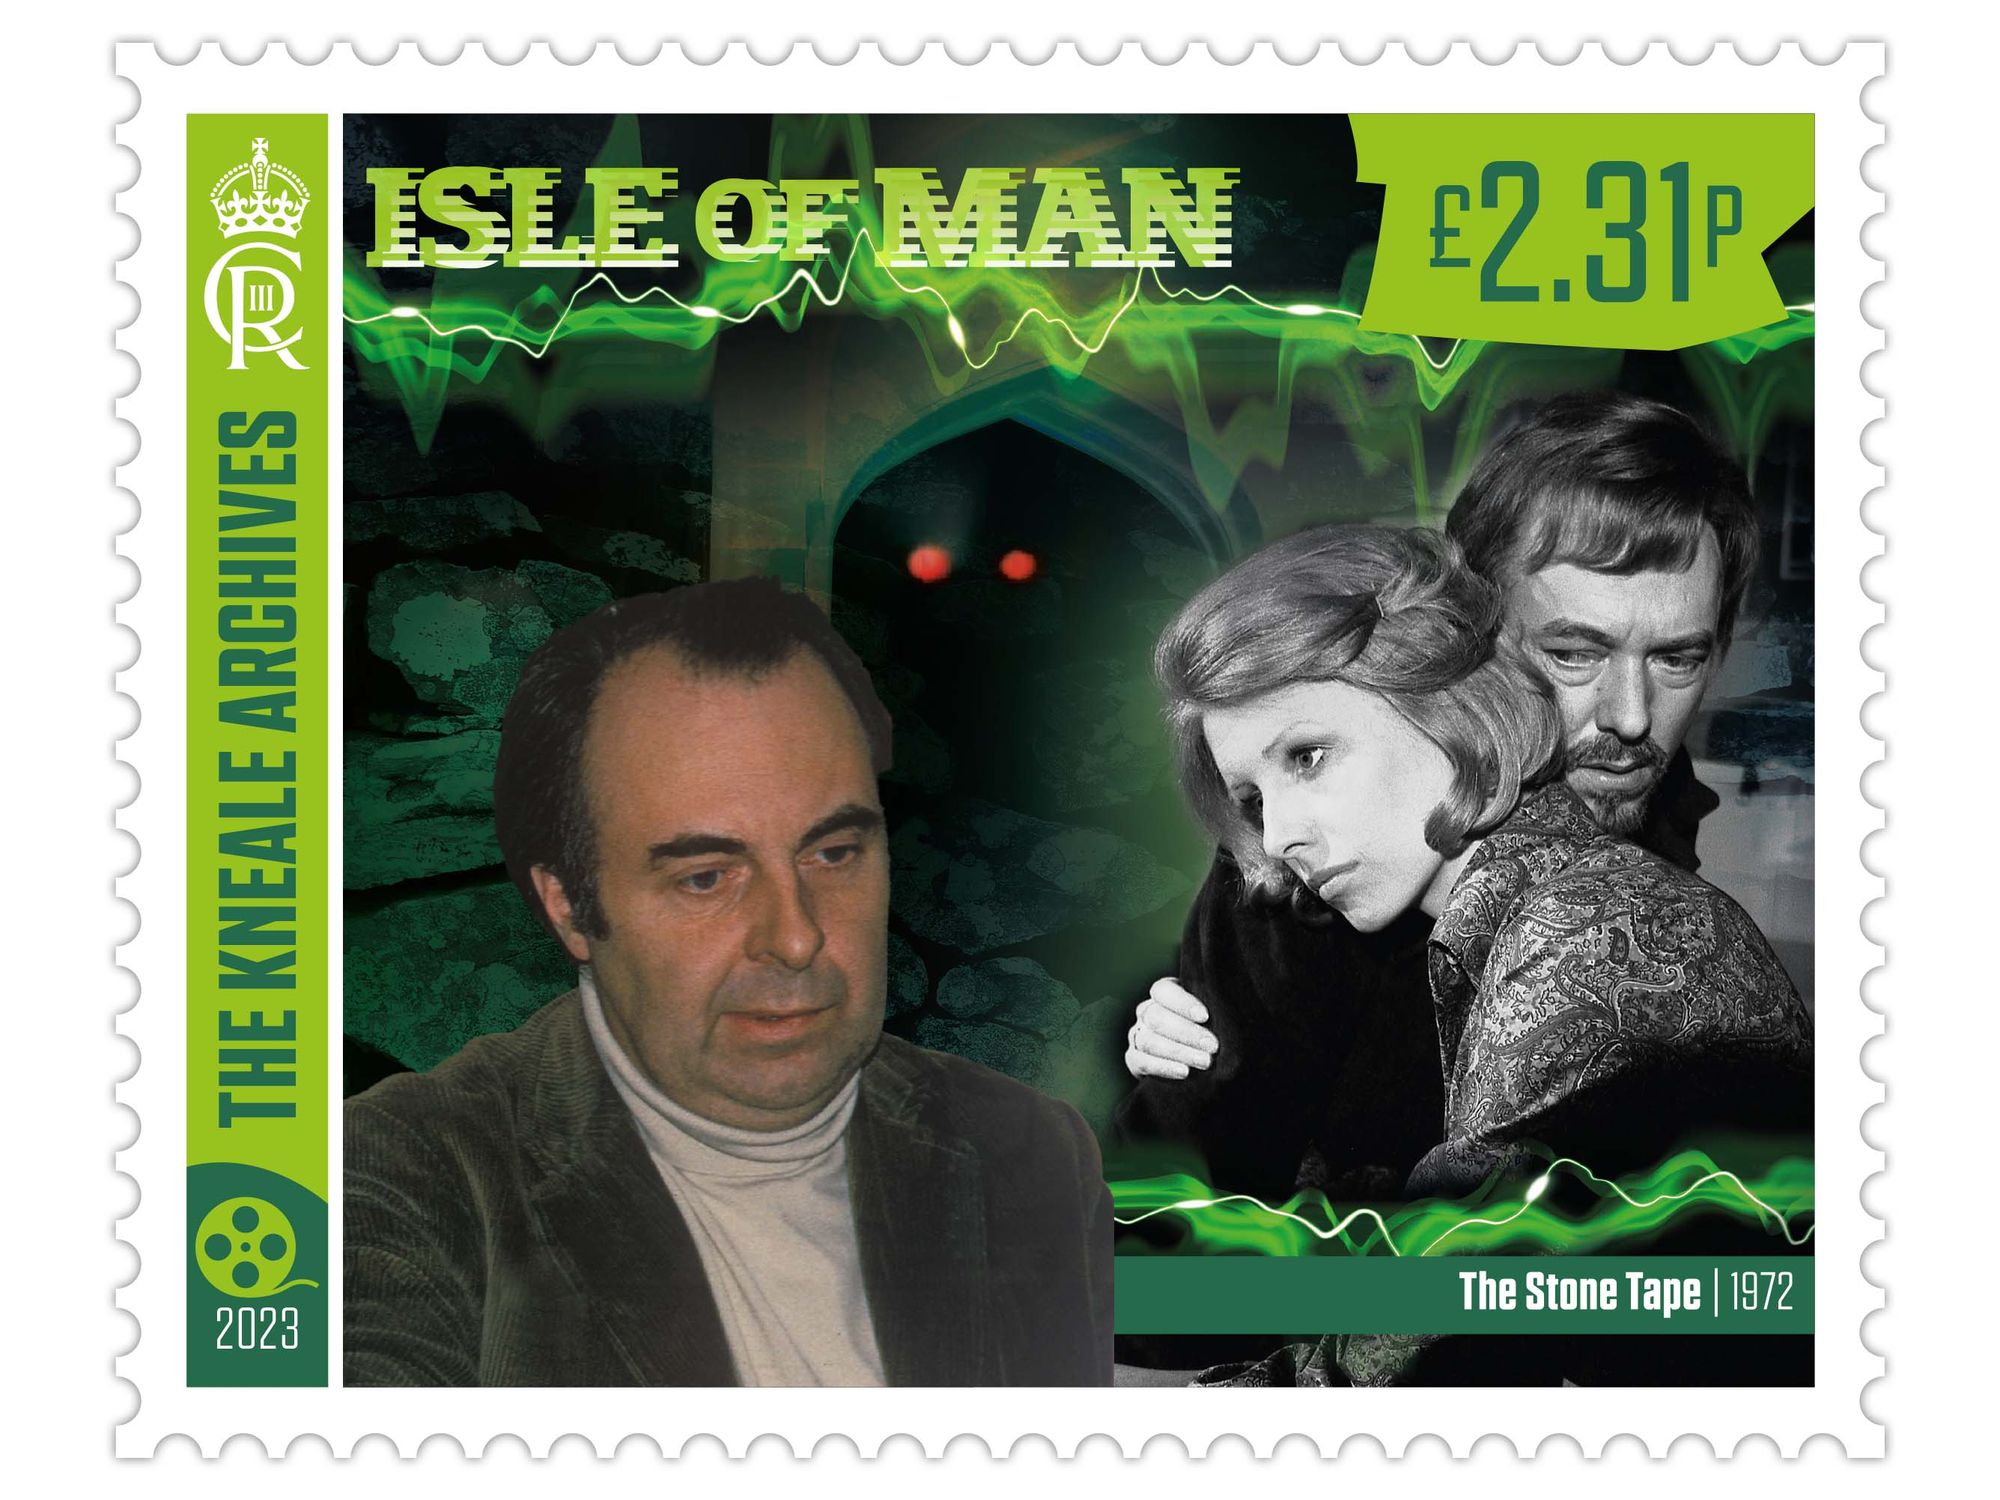 Quatermass Creator Nigel Kneale Commemorated in Postage Stamps